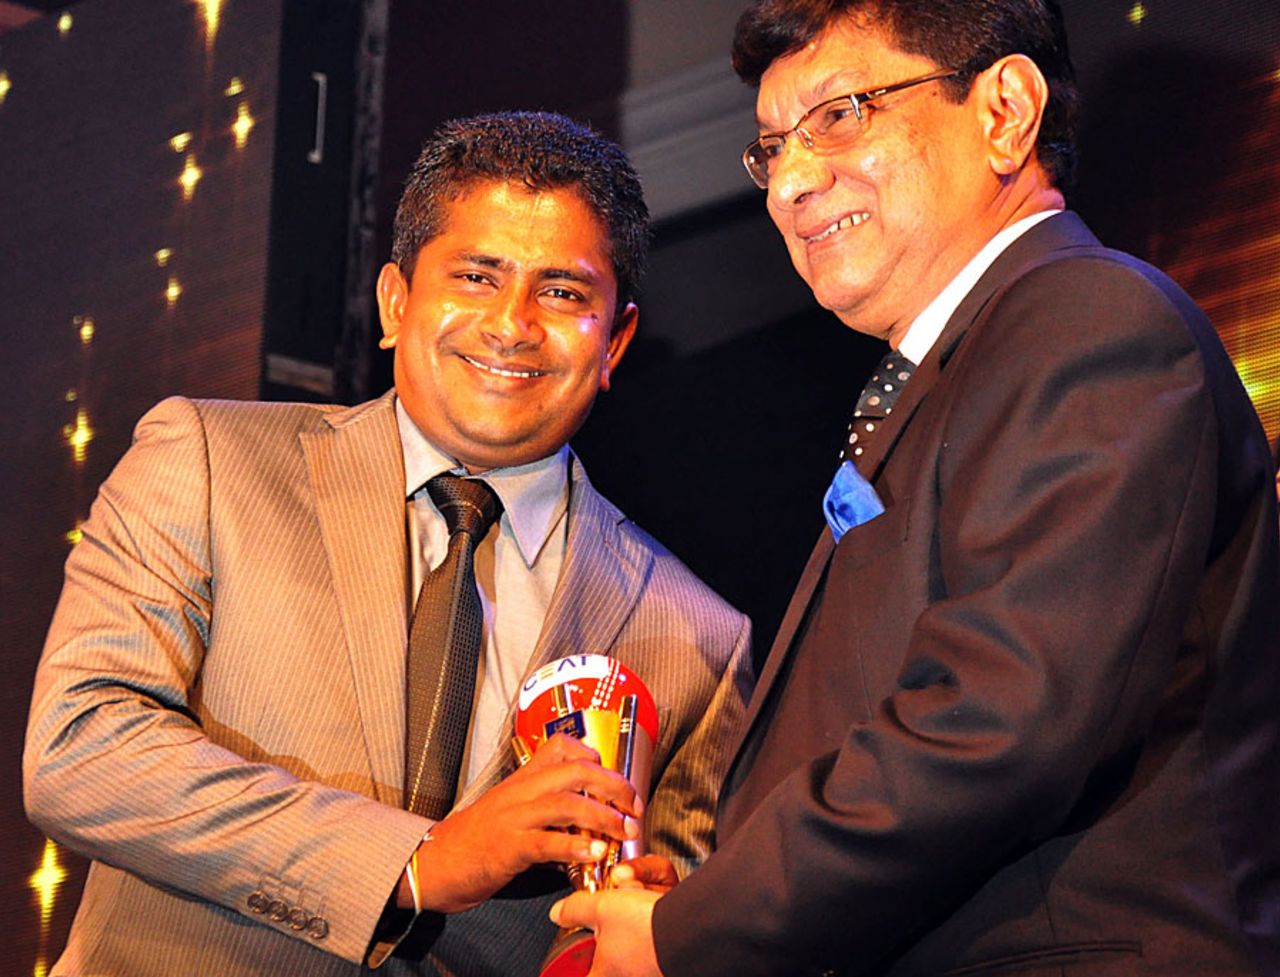 Rangana Herath was named Test Bowler of the Year at the CEAT Awards, Colombo, September 5, 2012